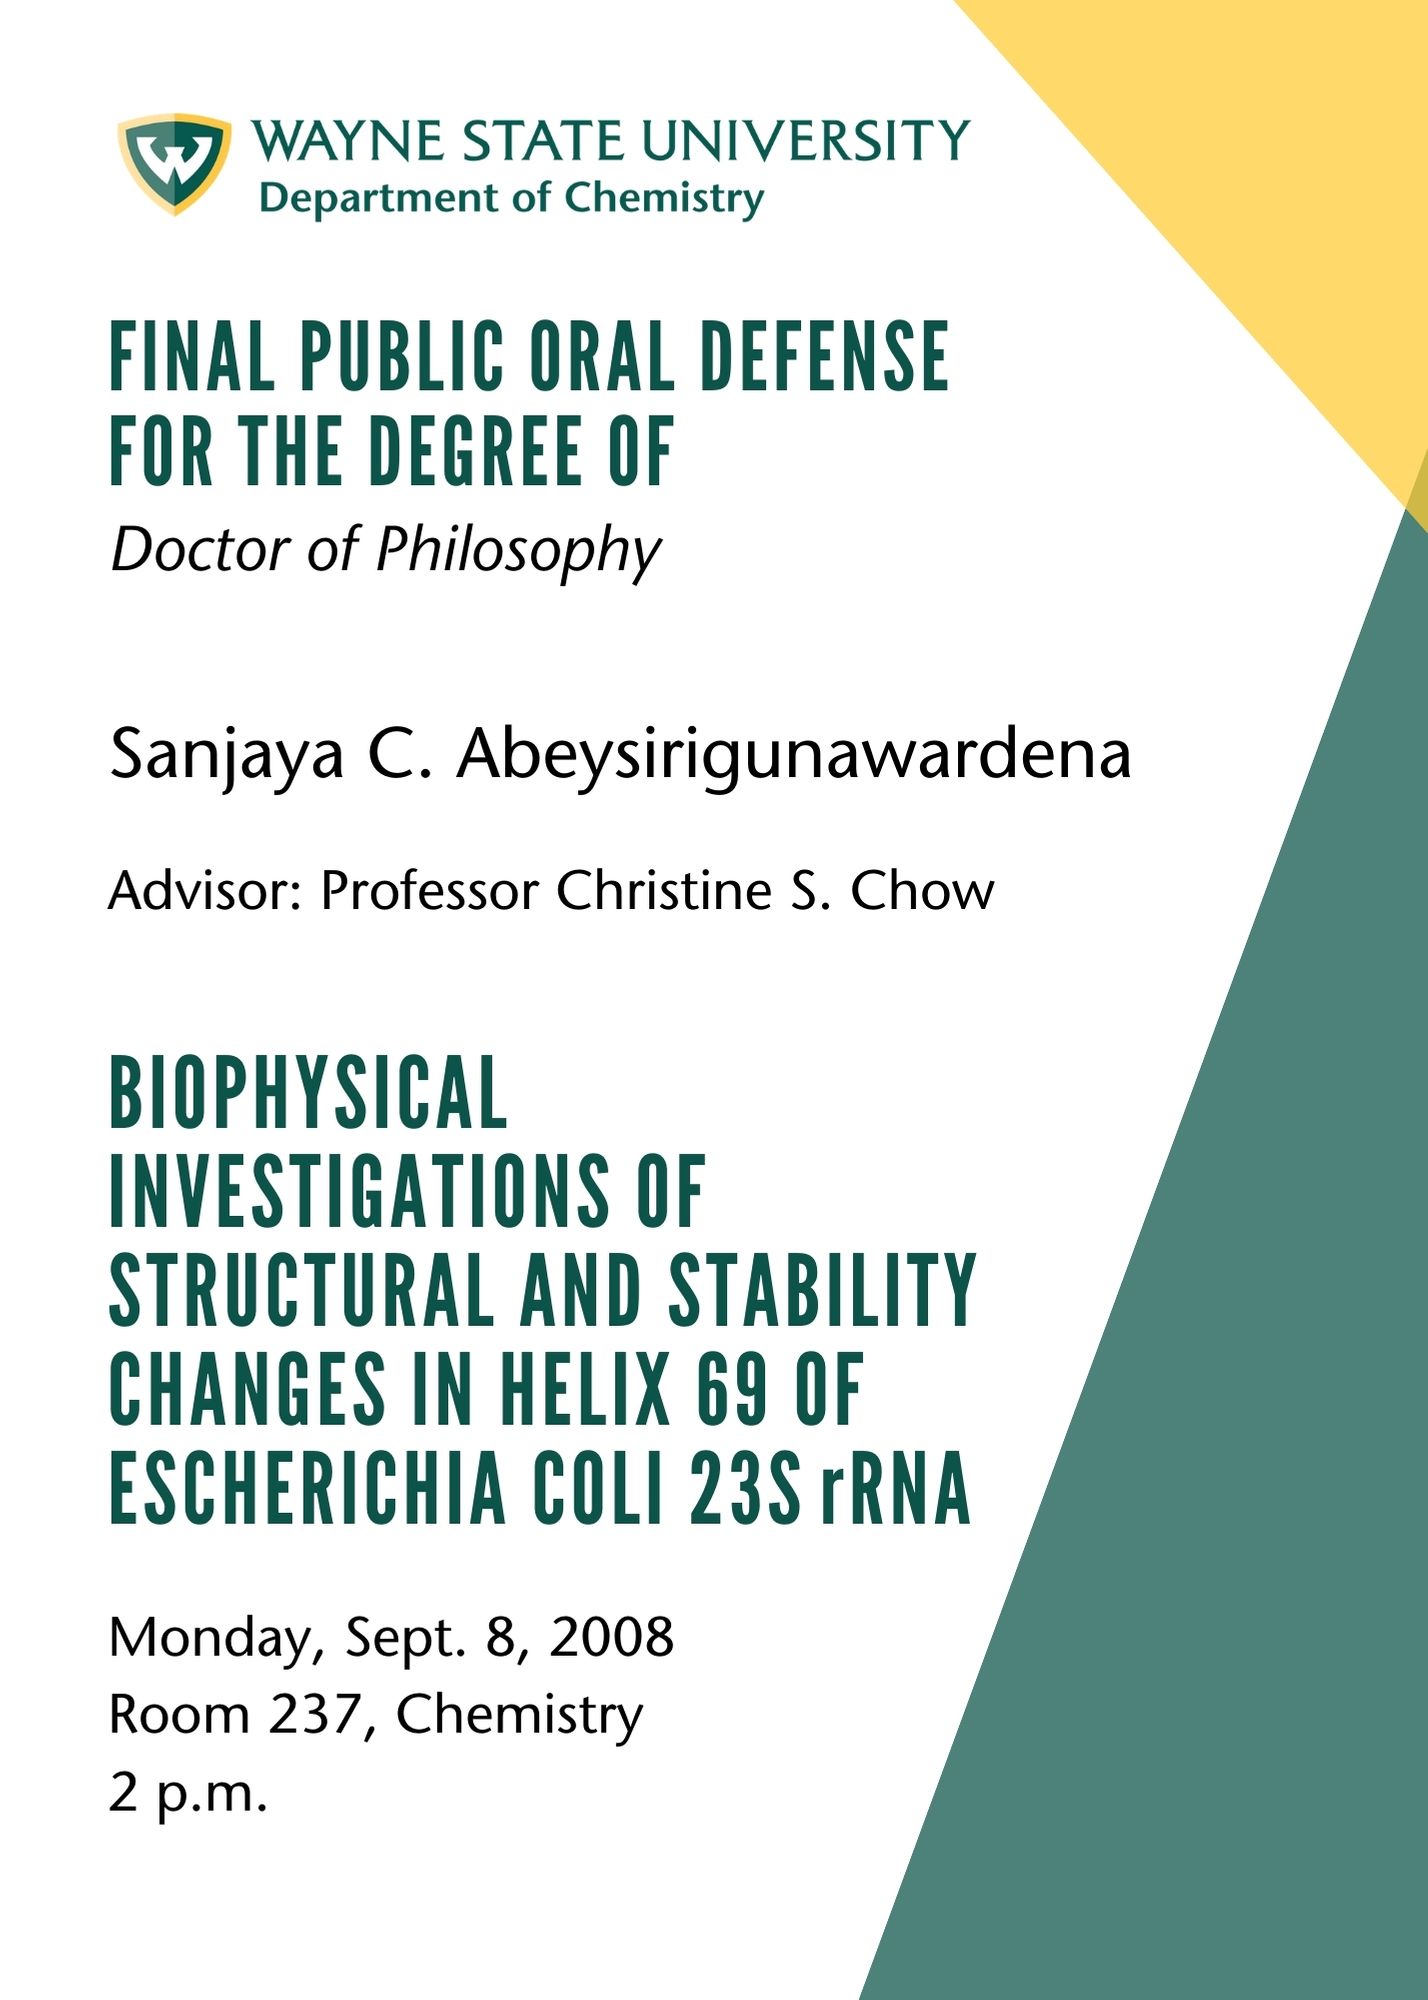 Final public defense sample announcement. Title: Final Public Oral Defense for the Degree of Doctor of Philosophy